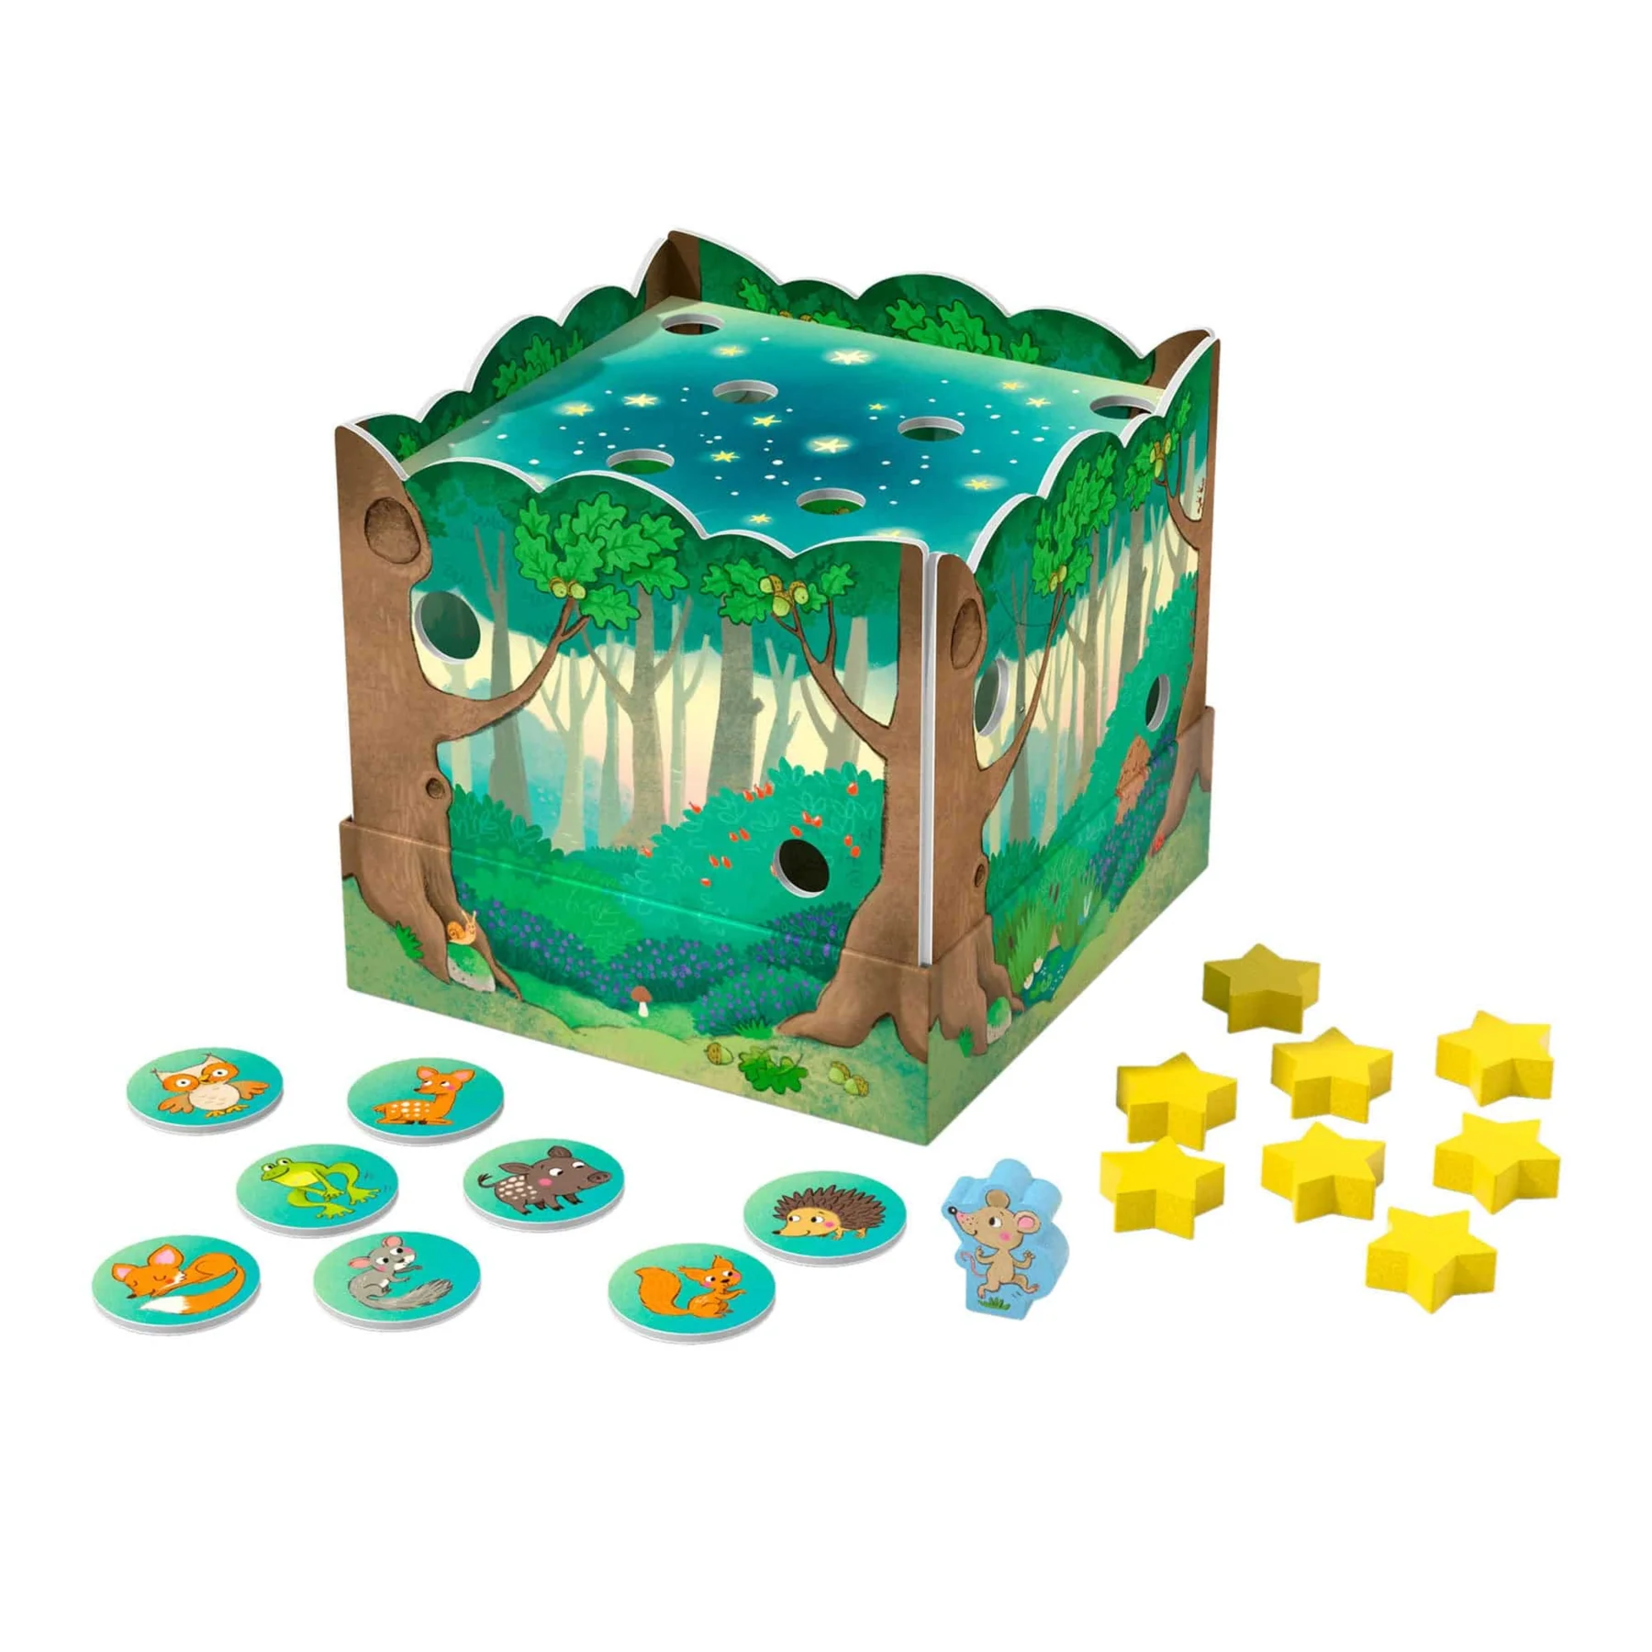 Haba My Very First Games - Forest Friends